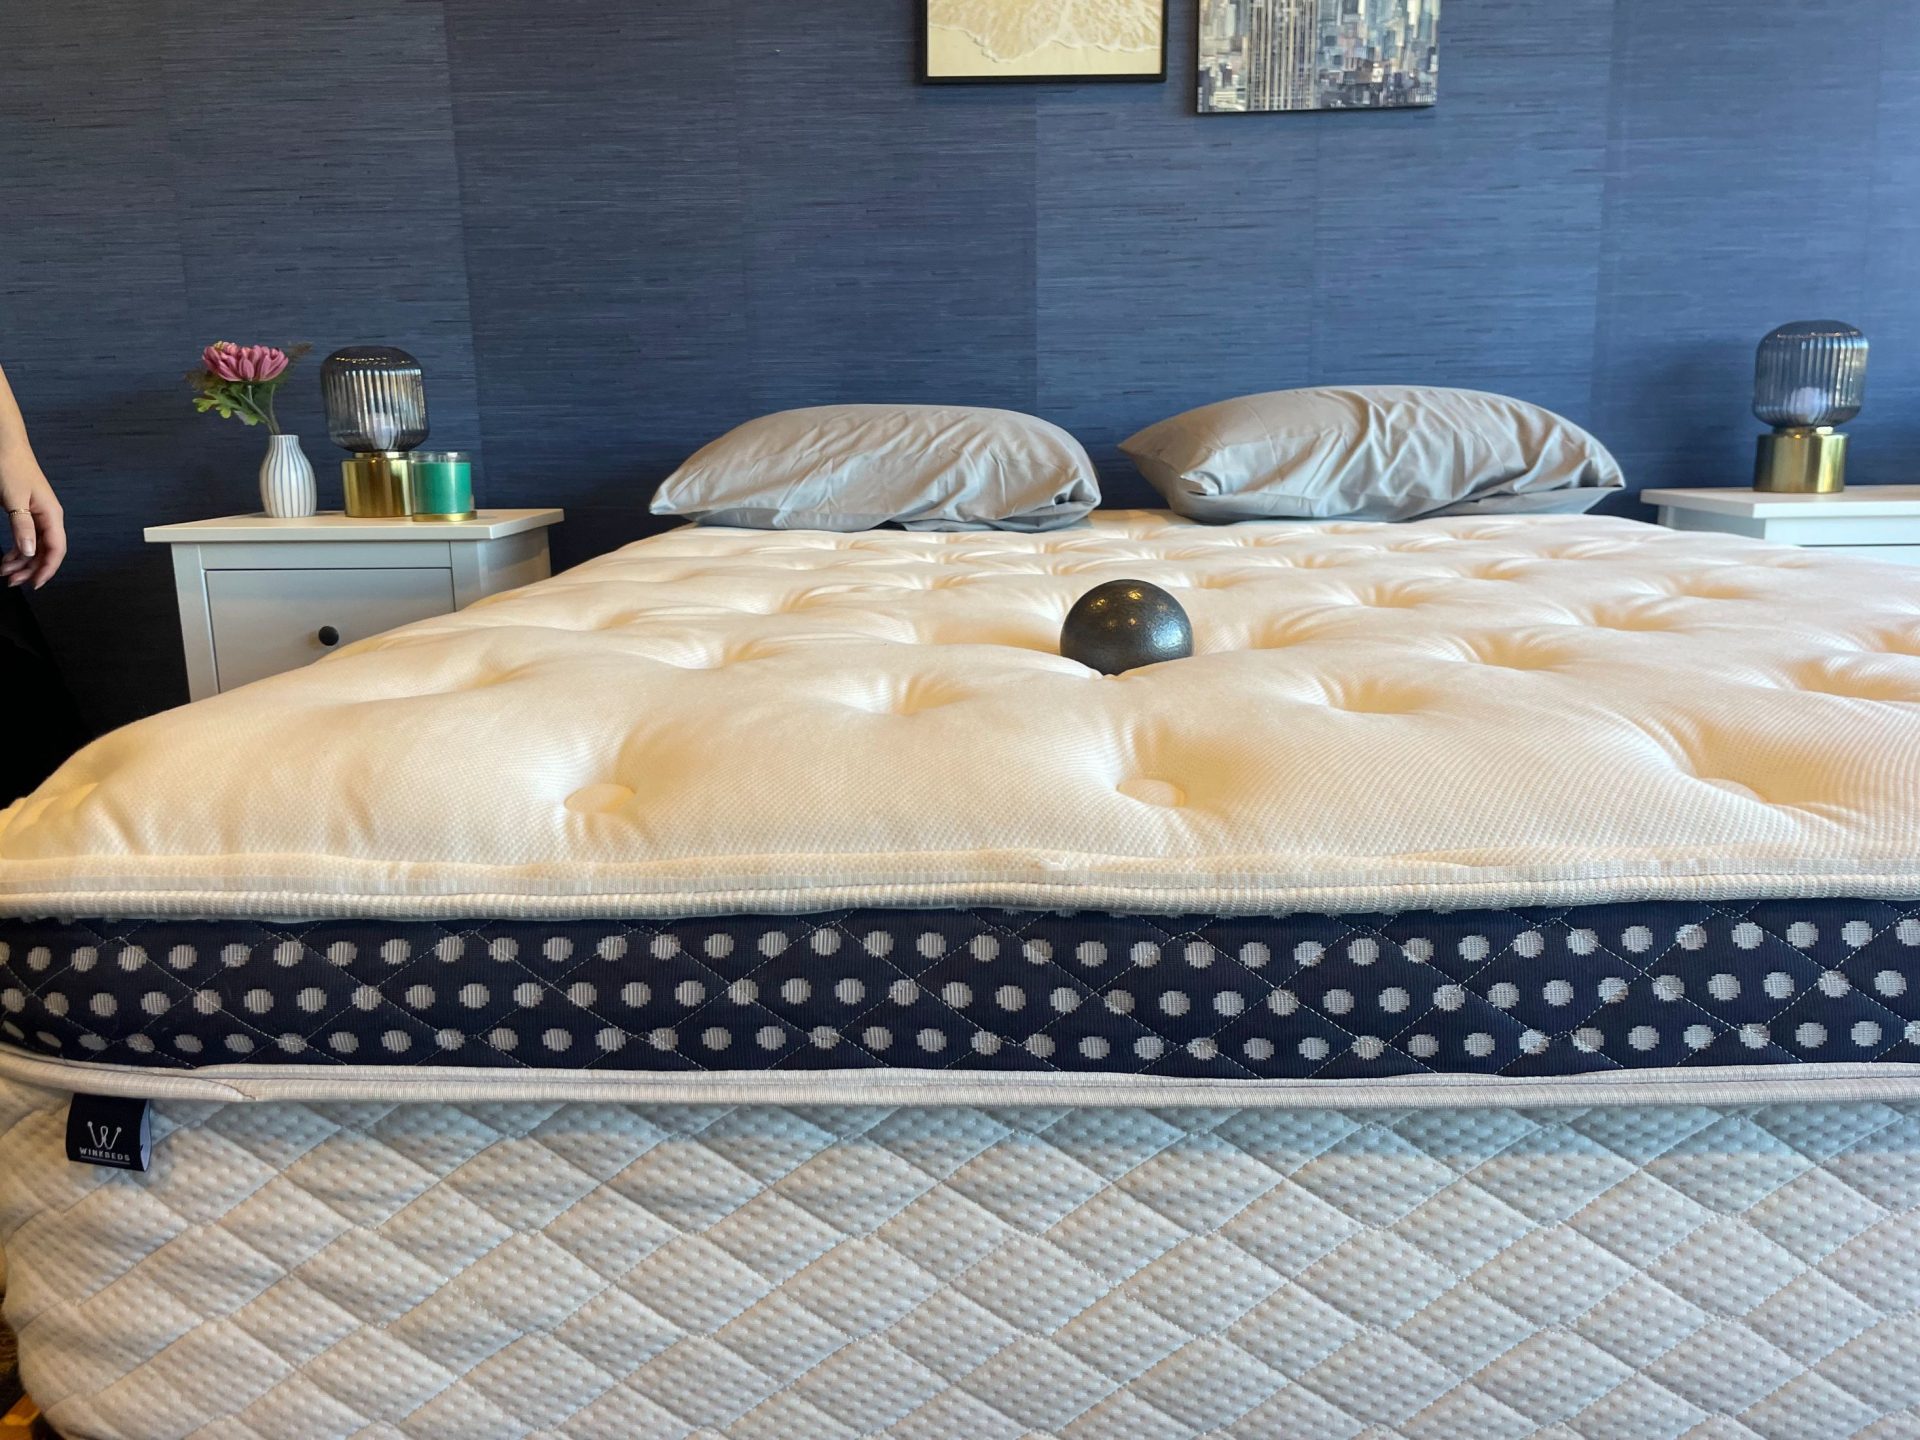 The WinkBed mattress with a weighted ball in the center to test the mattress’s firmness.
